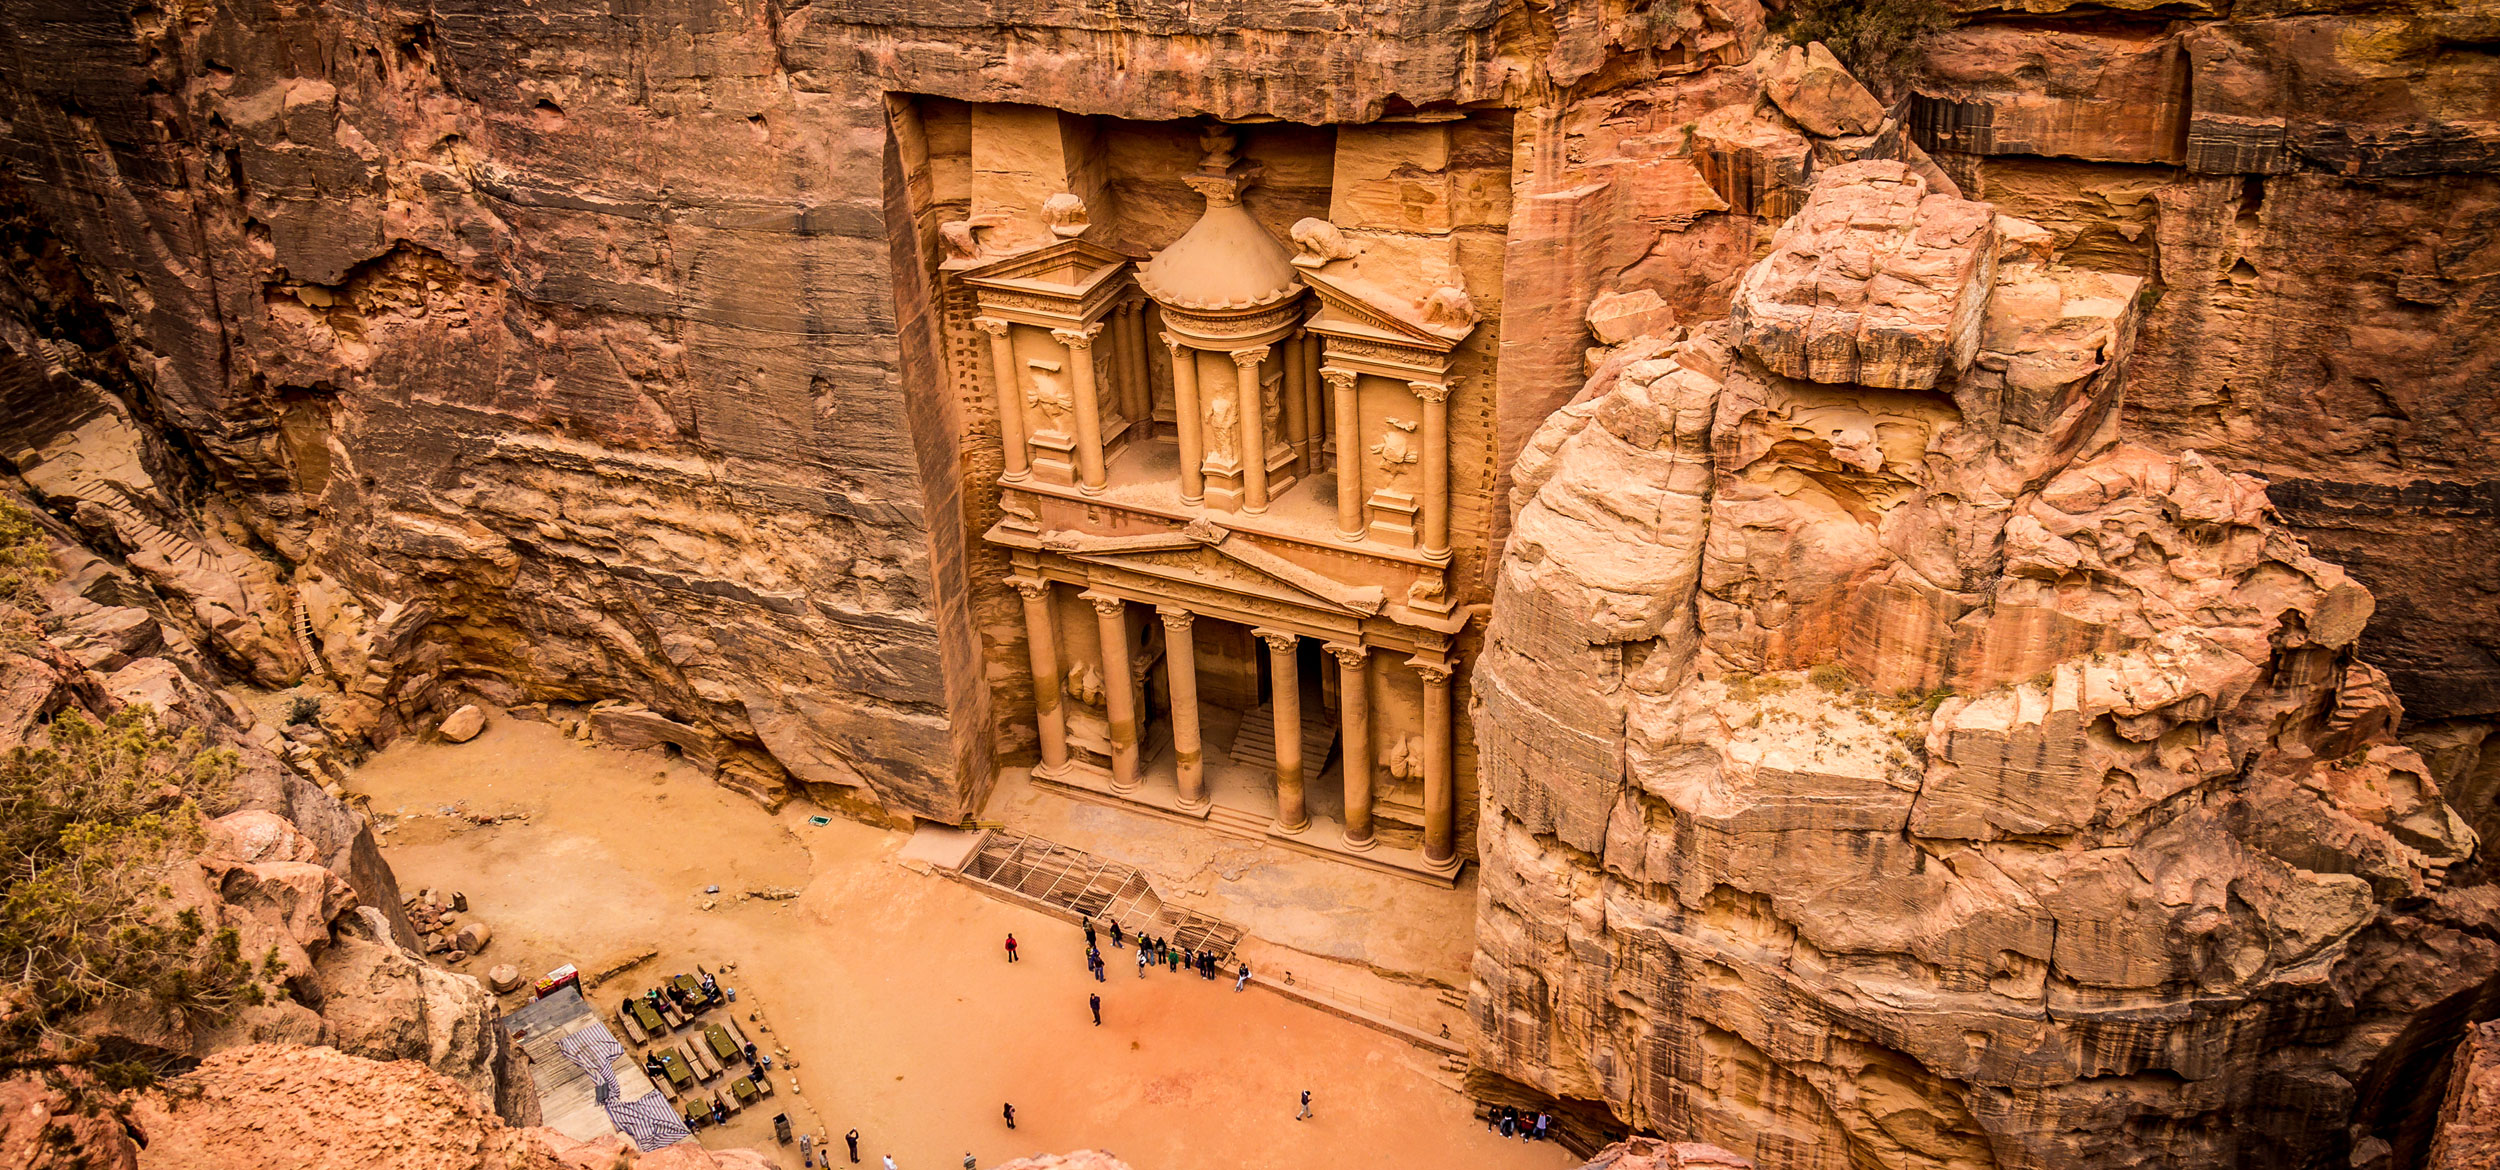 An aerial view of the Treasury at the famous archaeological site of Petra in Jordan.